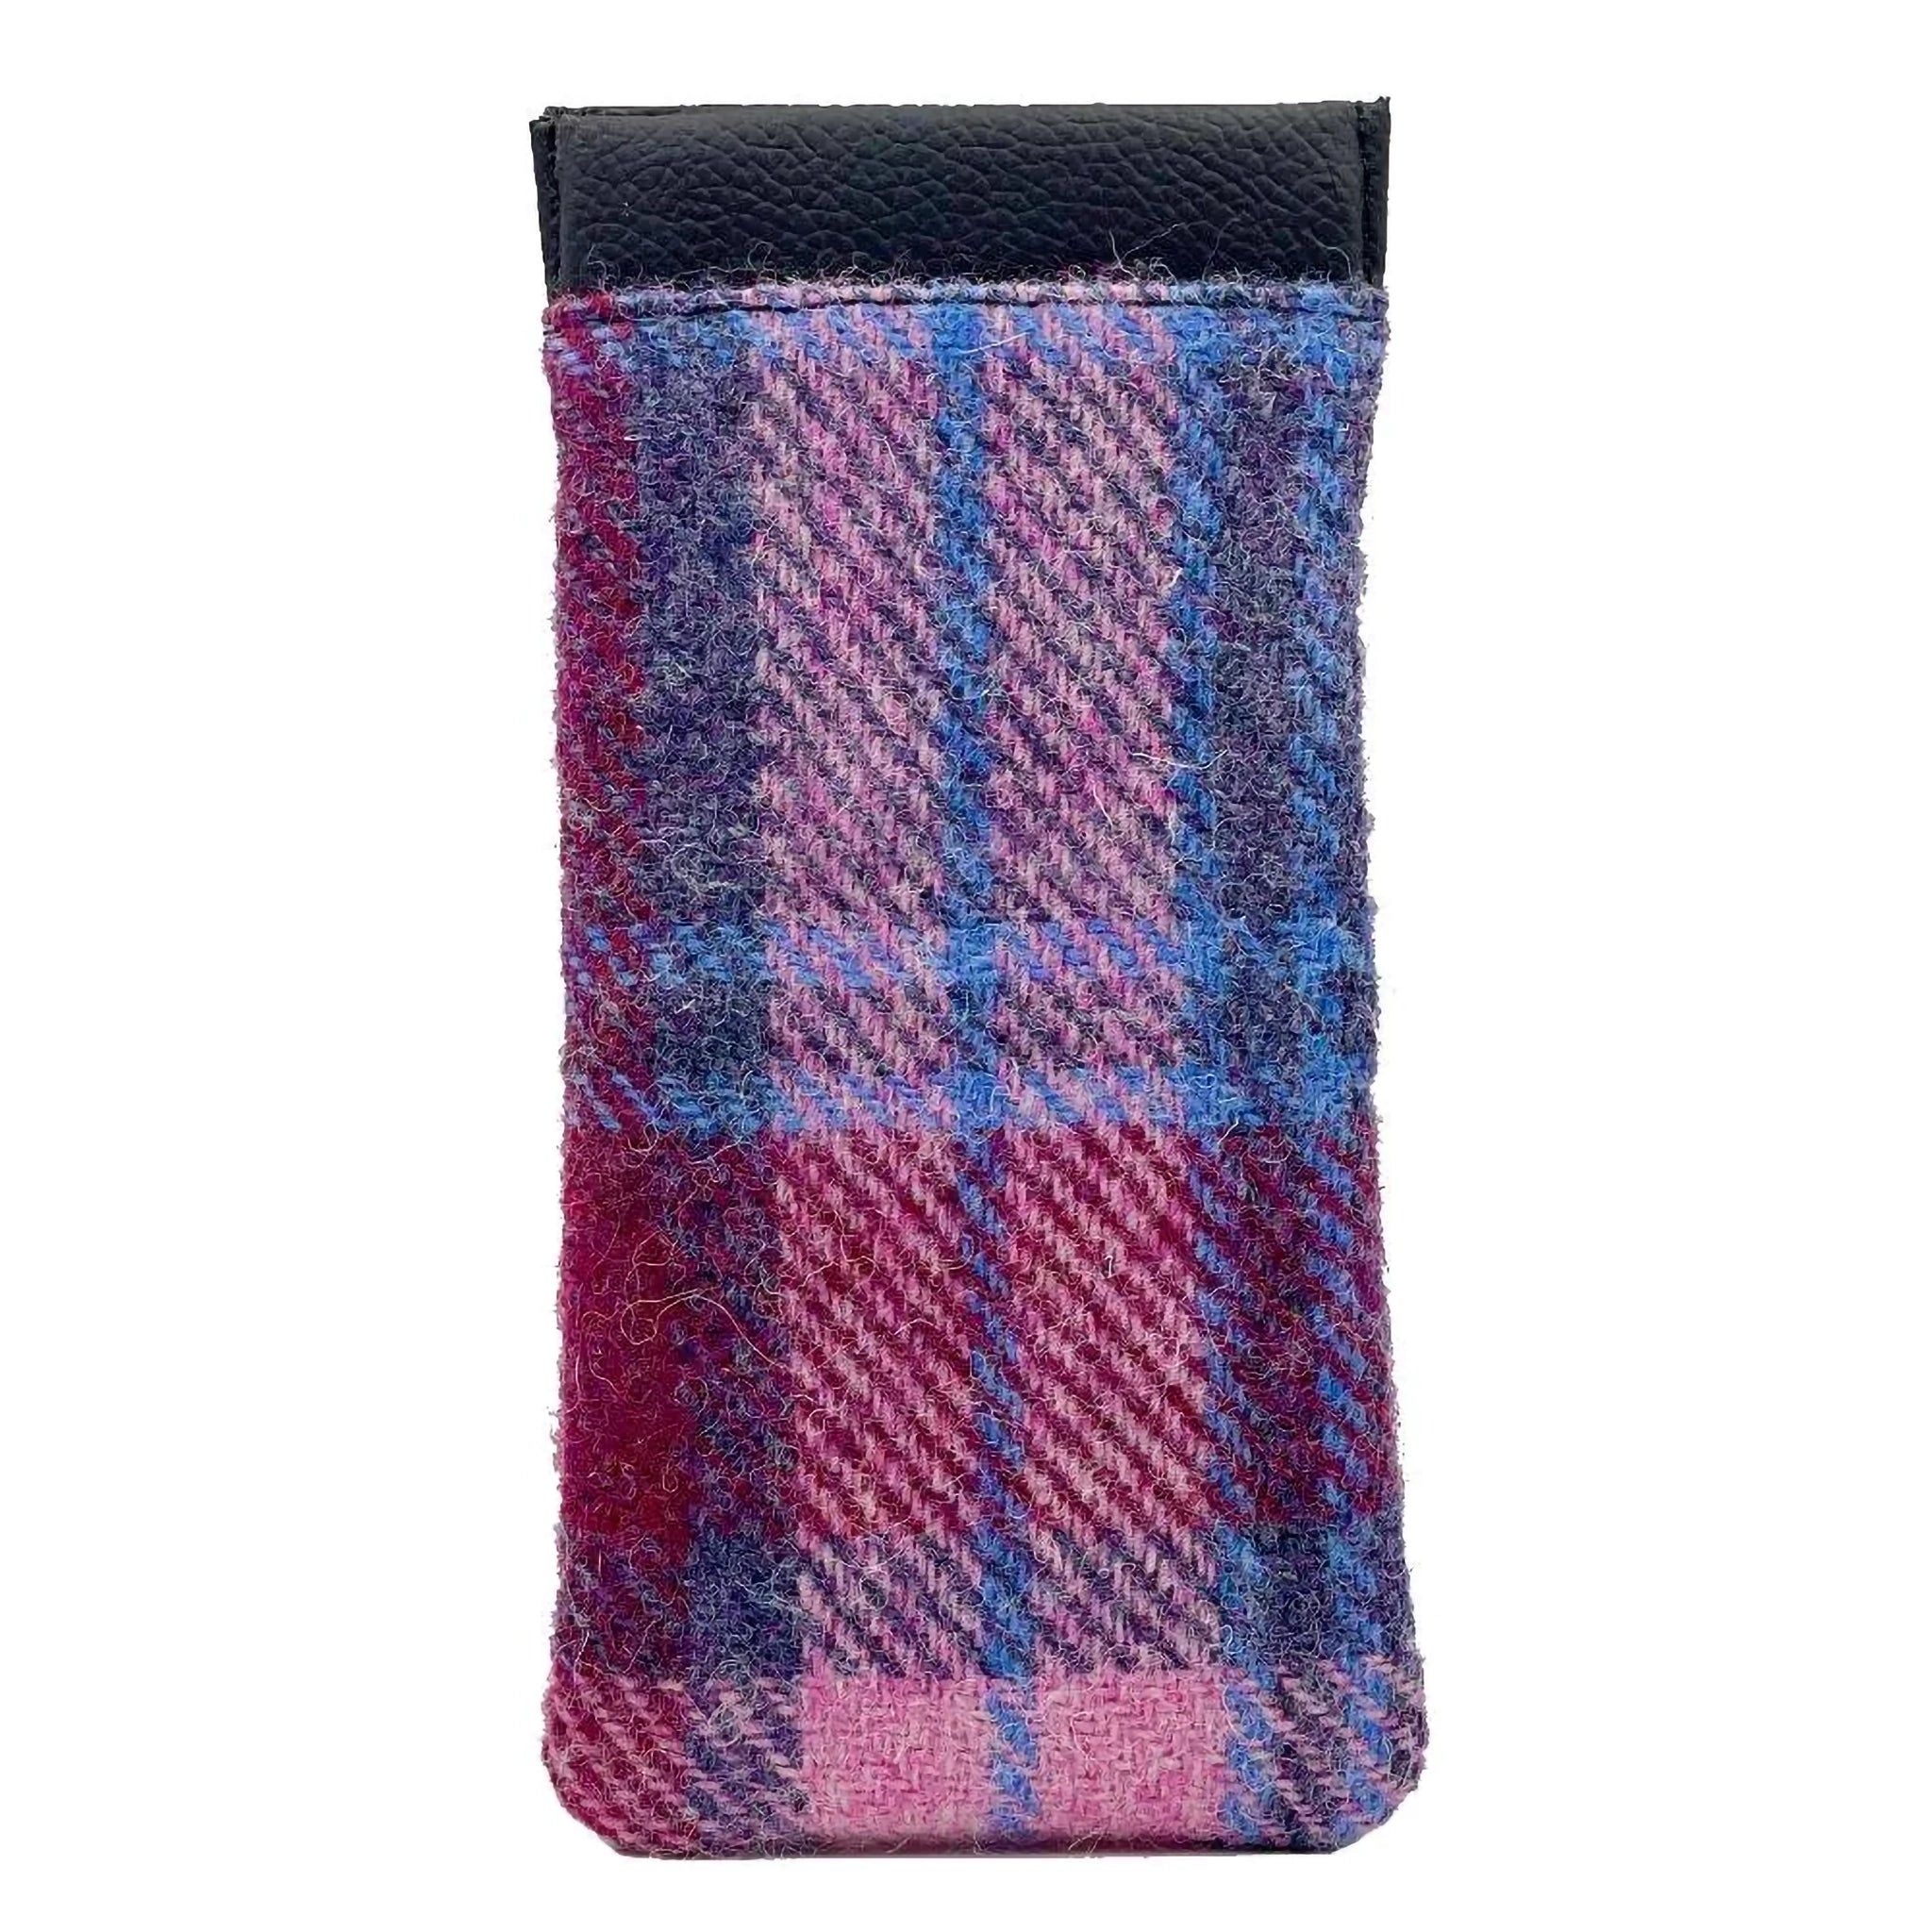 A Harris Tweed glasses sleeve in purple and pink check reverse